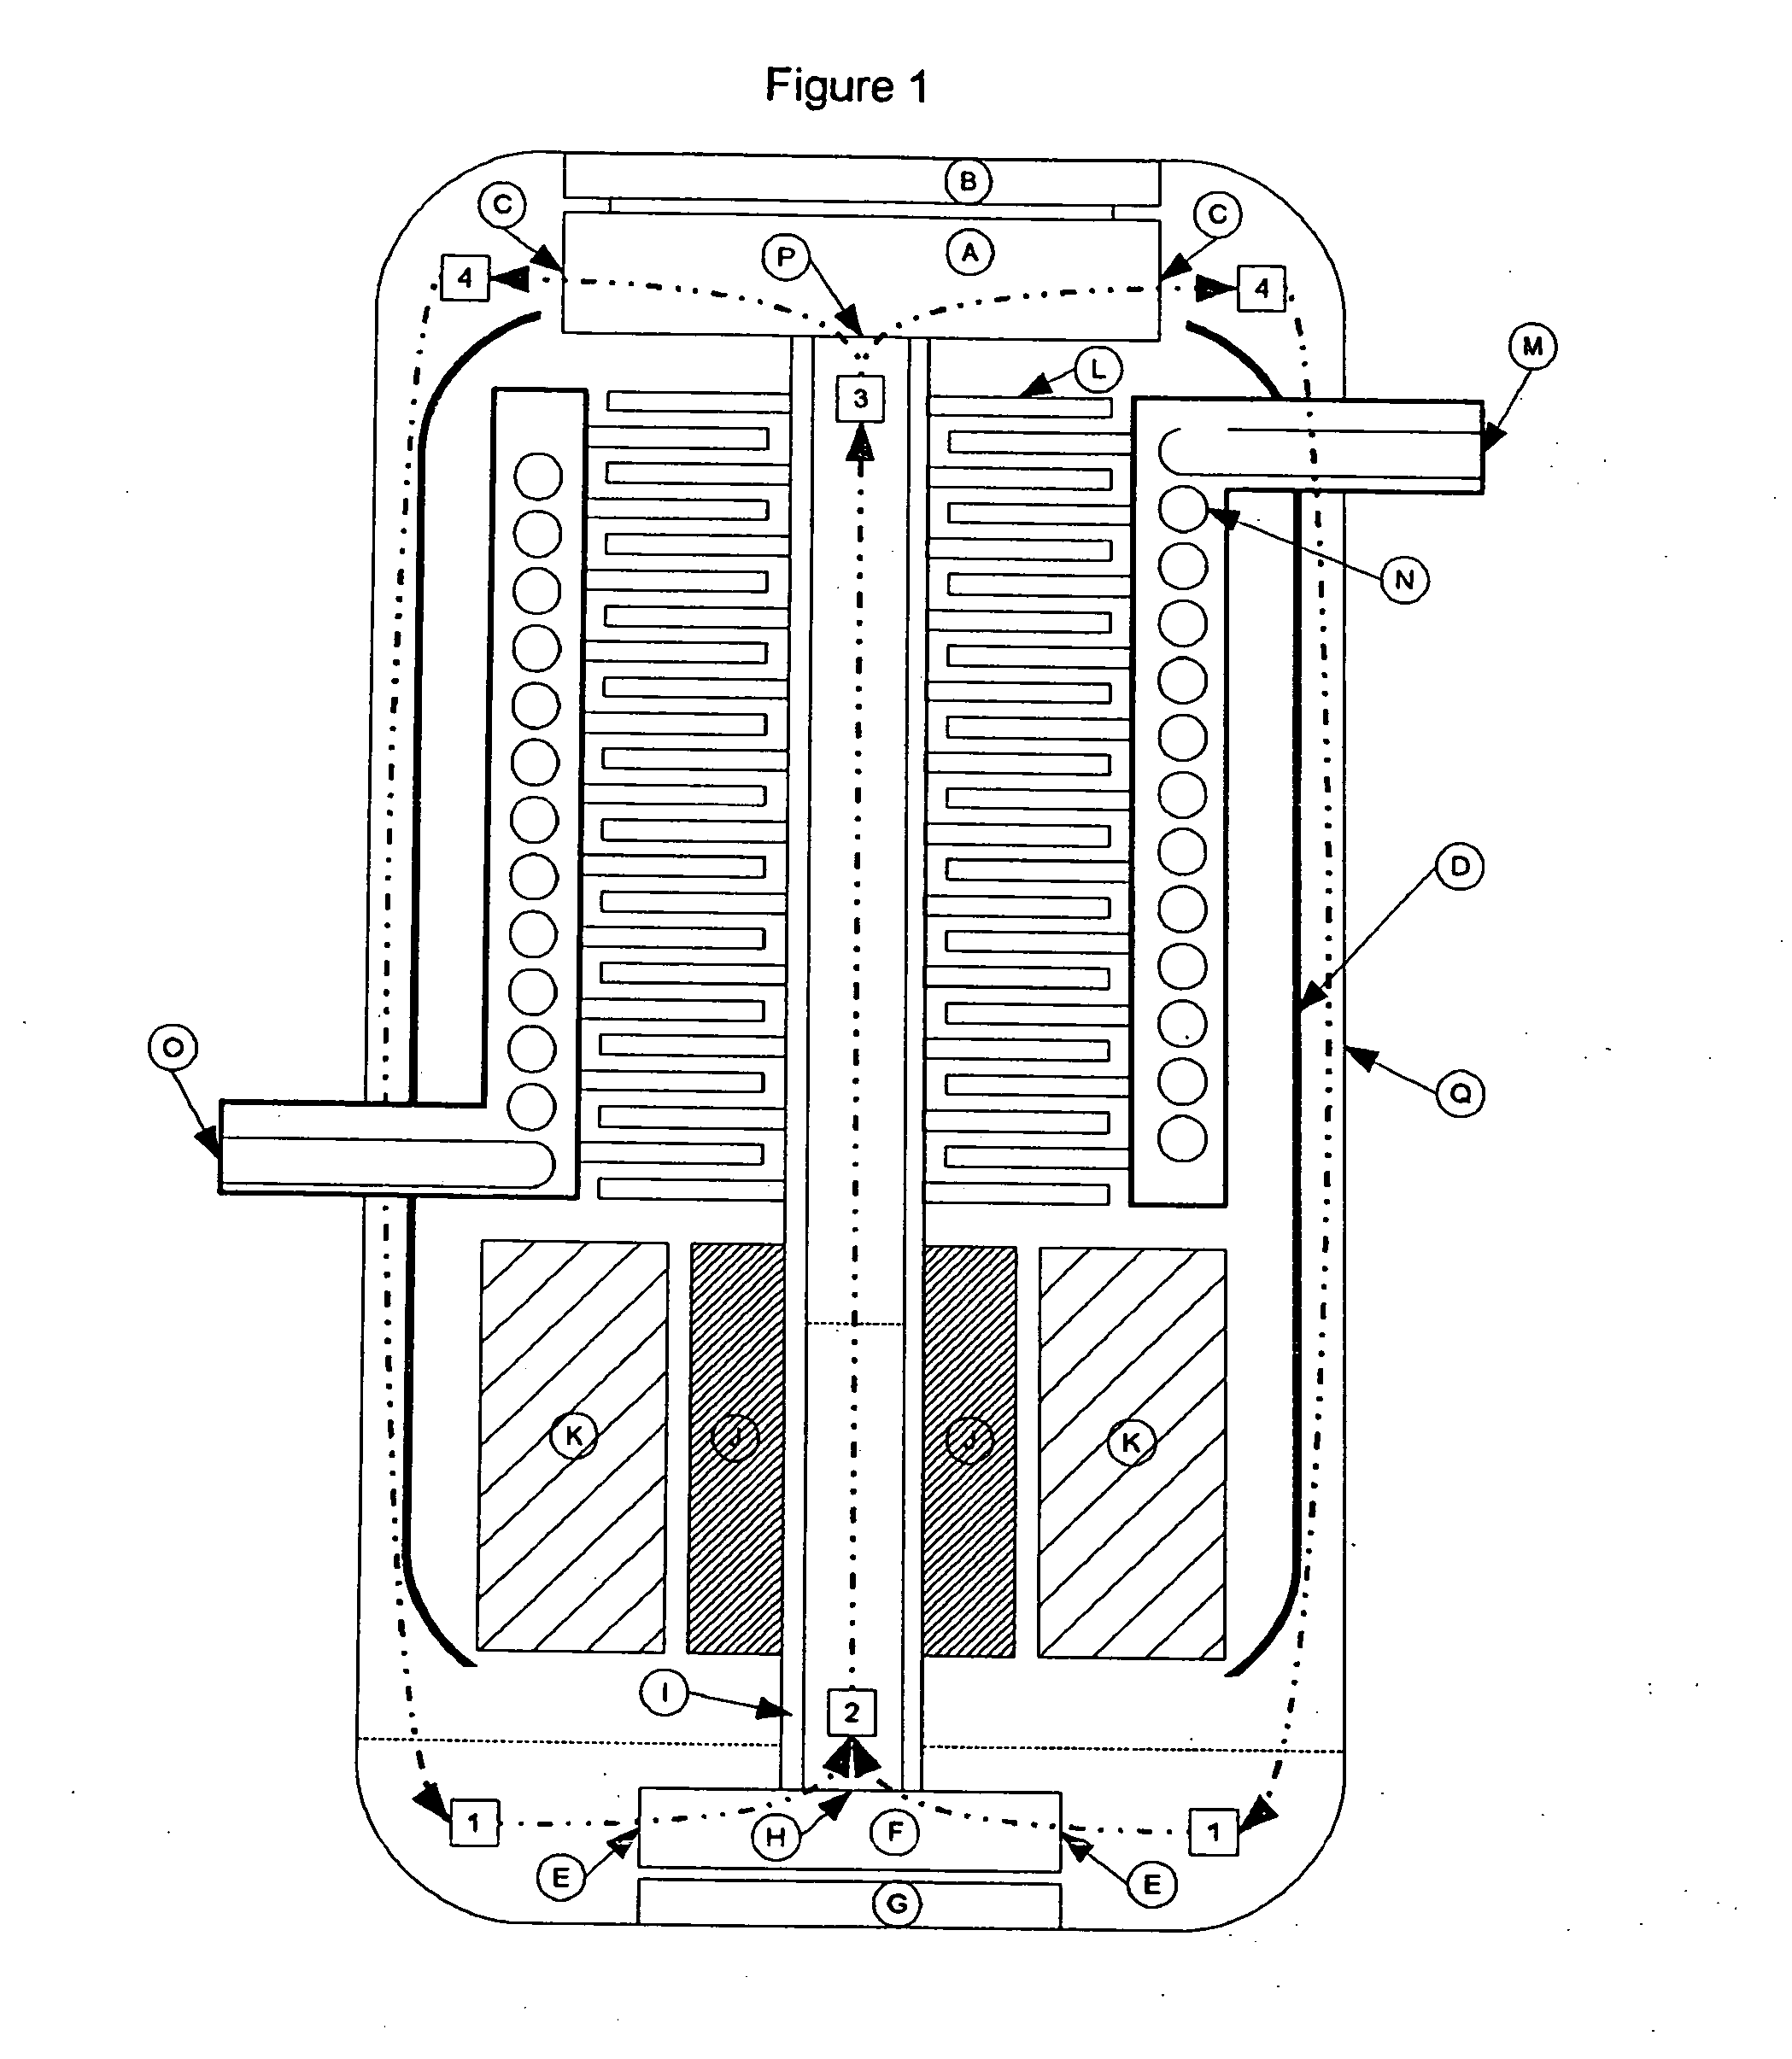 Compact Energy Cycle Construction Utilizing Some Combination of a Scroll Type Expander, Pump, and Compressor for Operating According to a Rankine, an Organic Rankine, Heat Pump, or Combined Orgainc Rankine and Heat Pump Cycle